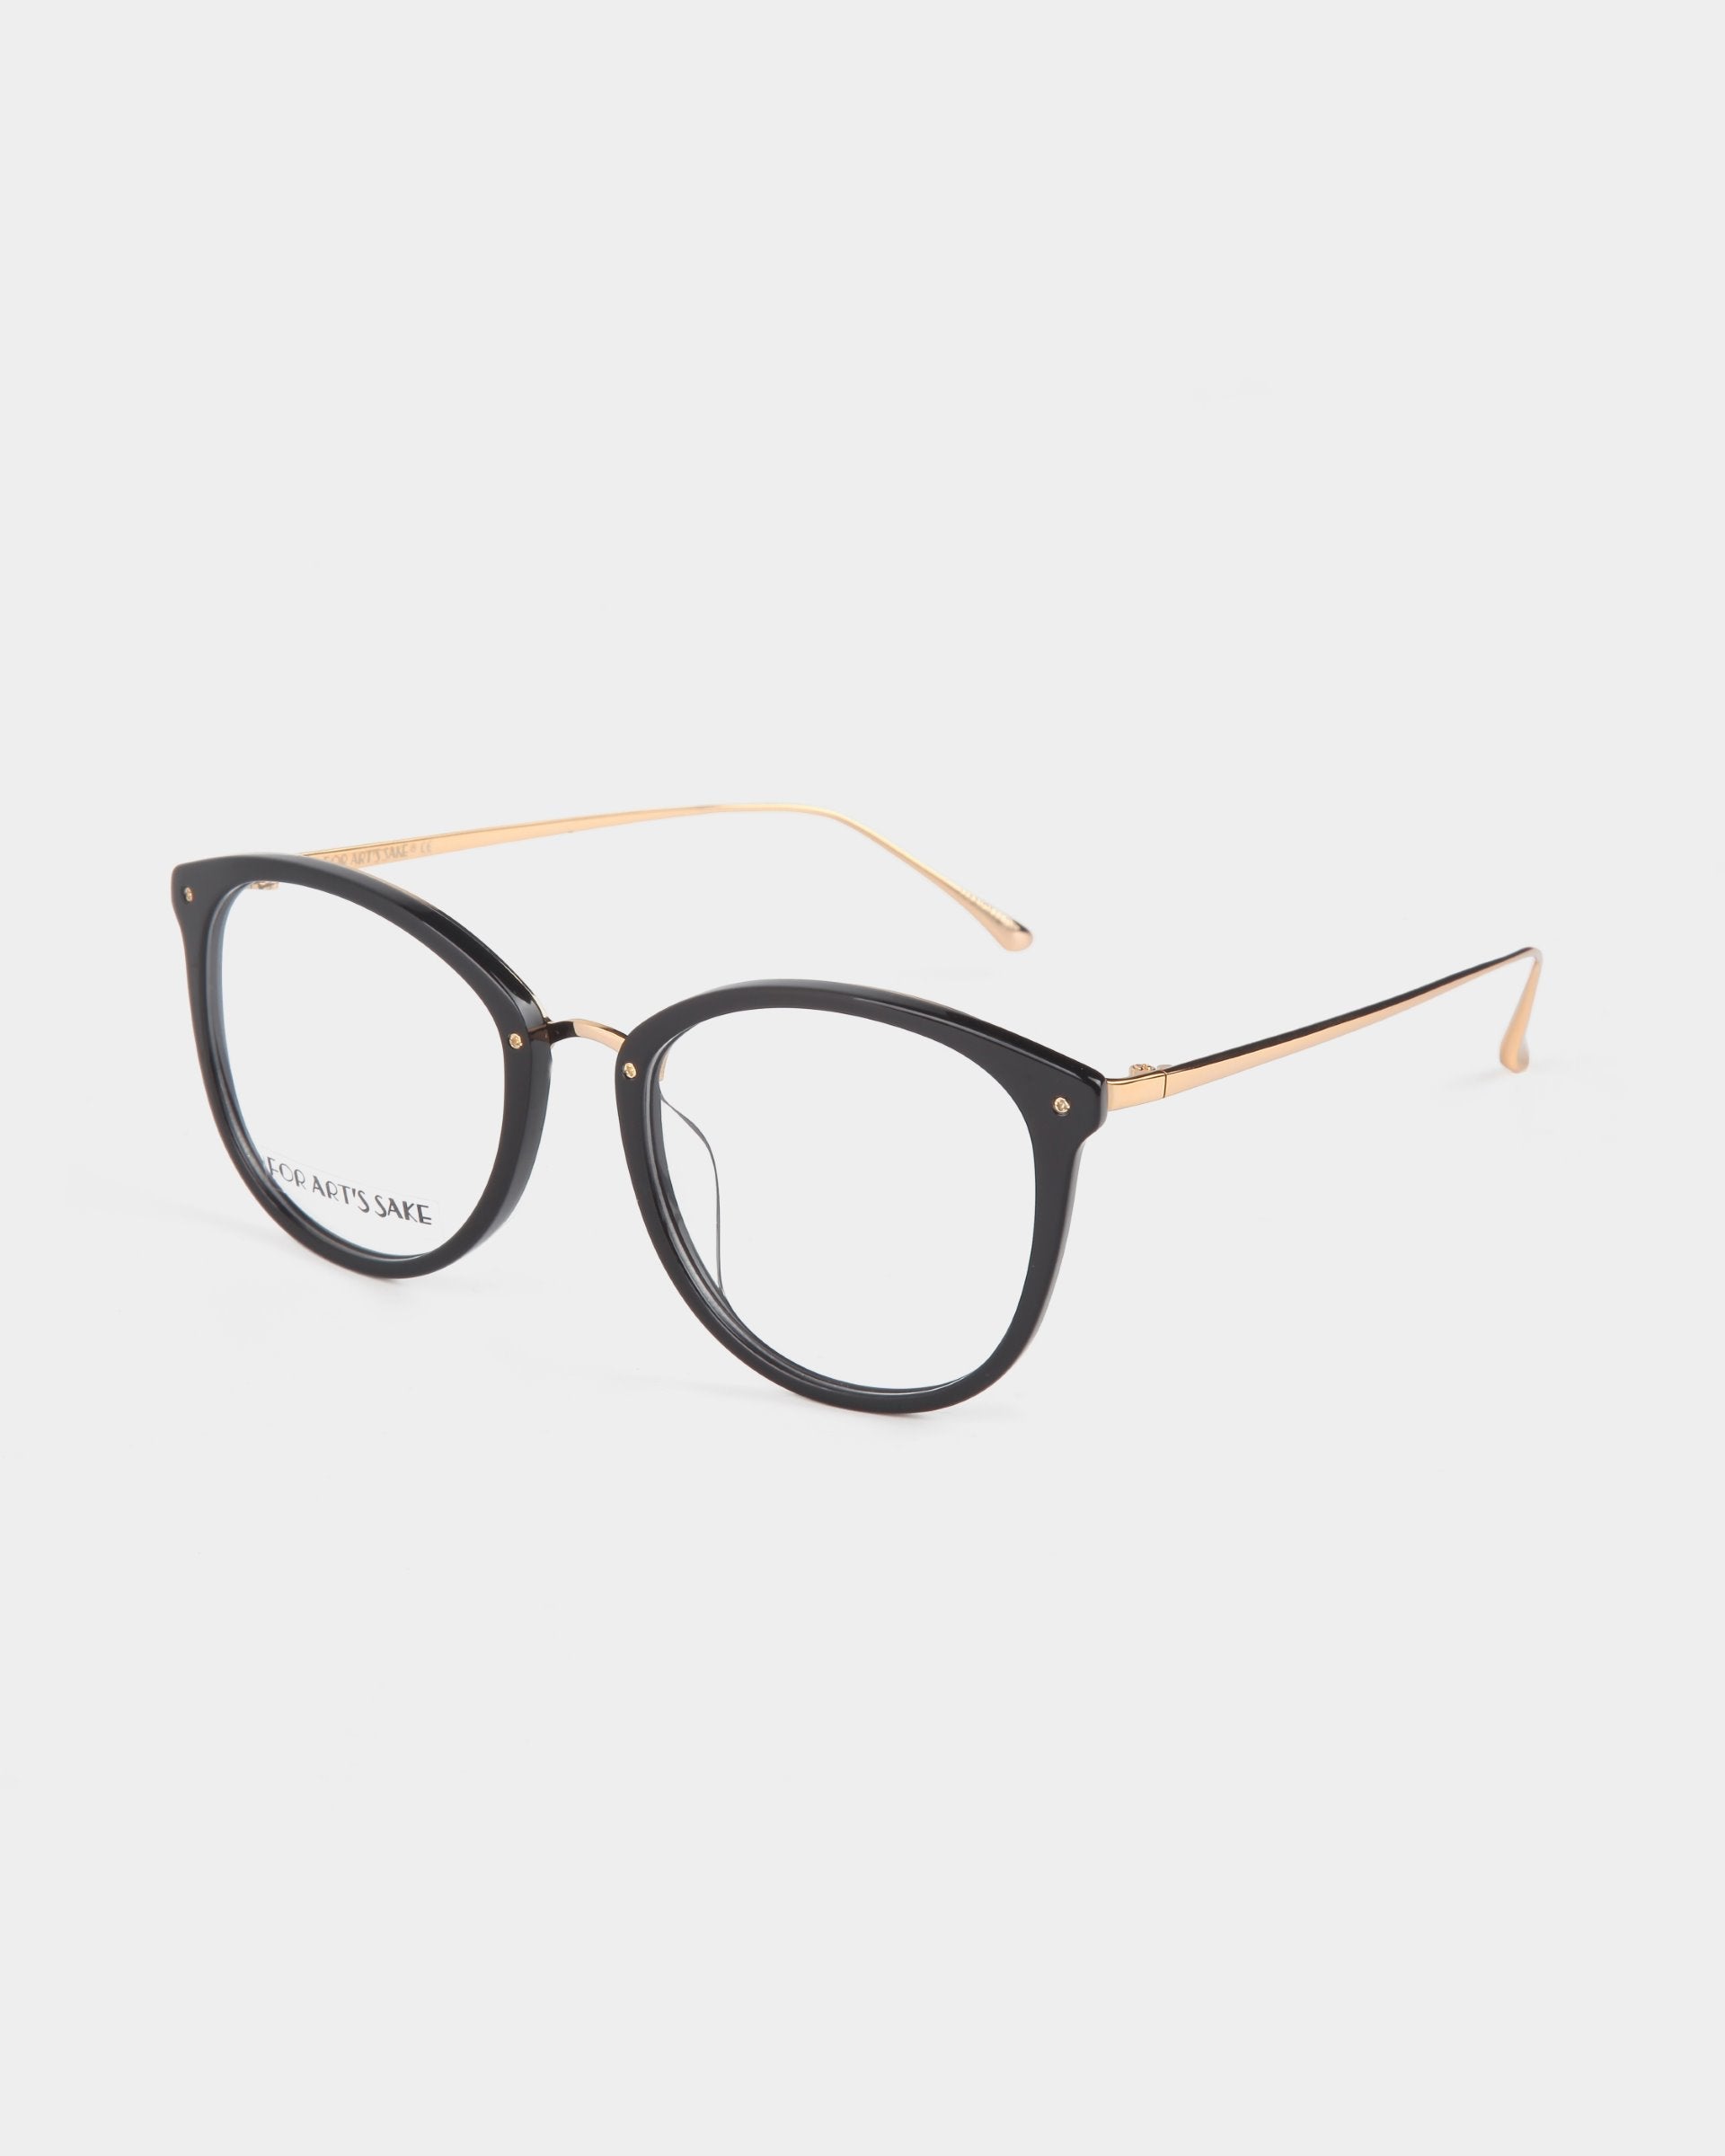 A pair of stylish Club eyeglasses by For Art's Sake® with black round frames and thin gold temples, featuring the left lens displaying the brand name in small font. These eyeglasses, offering blue light filter technology, are placed against a plain white background.